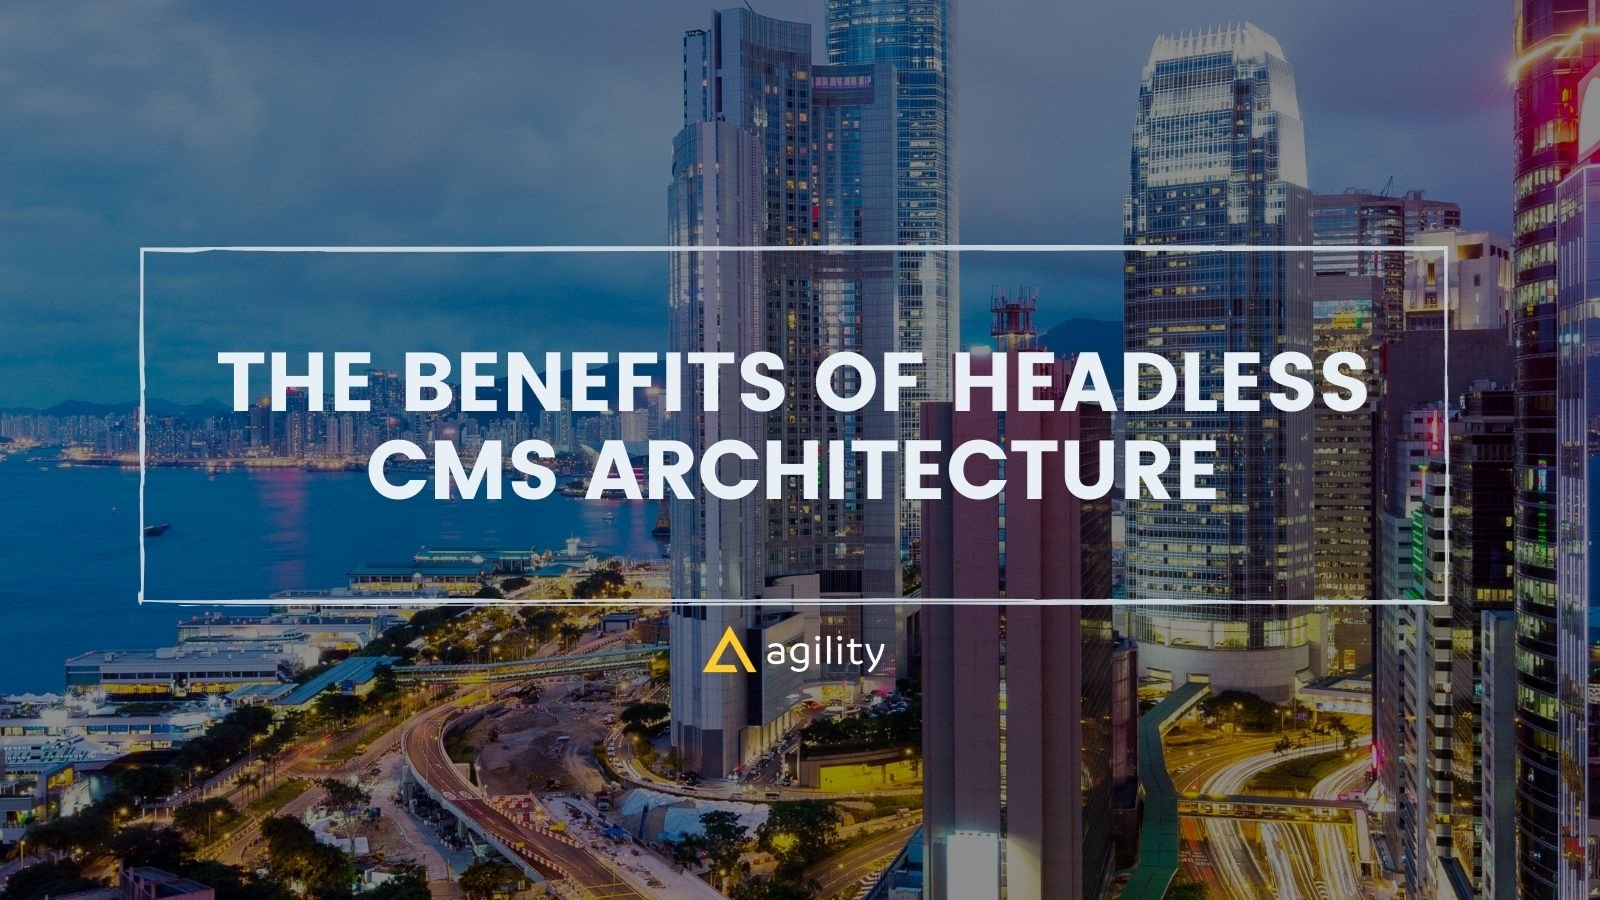 The Benefits of Headless CMS Architecture